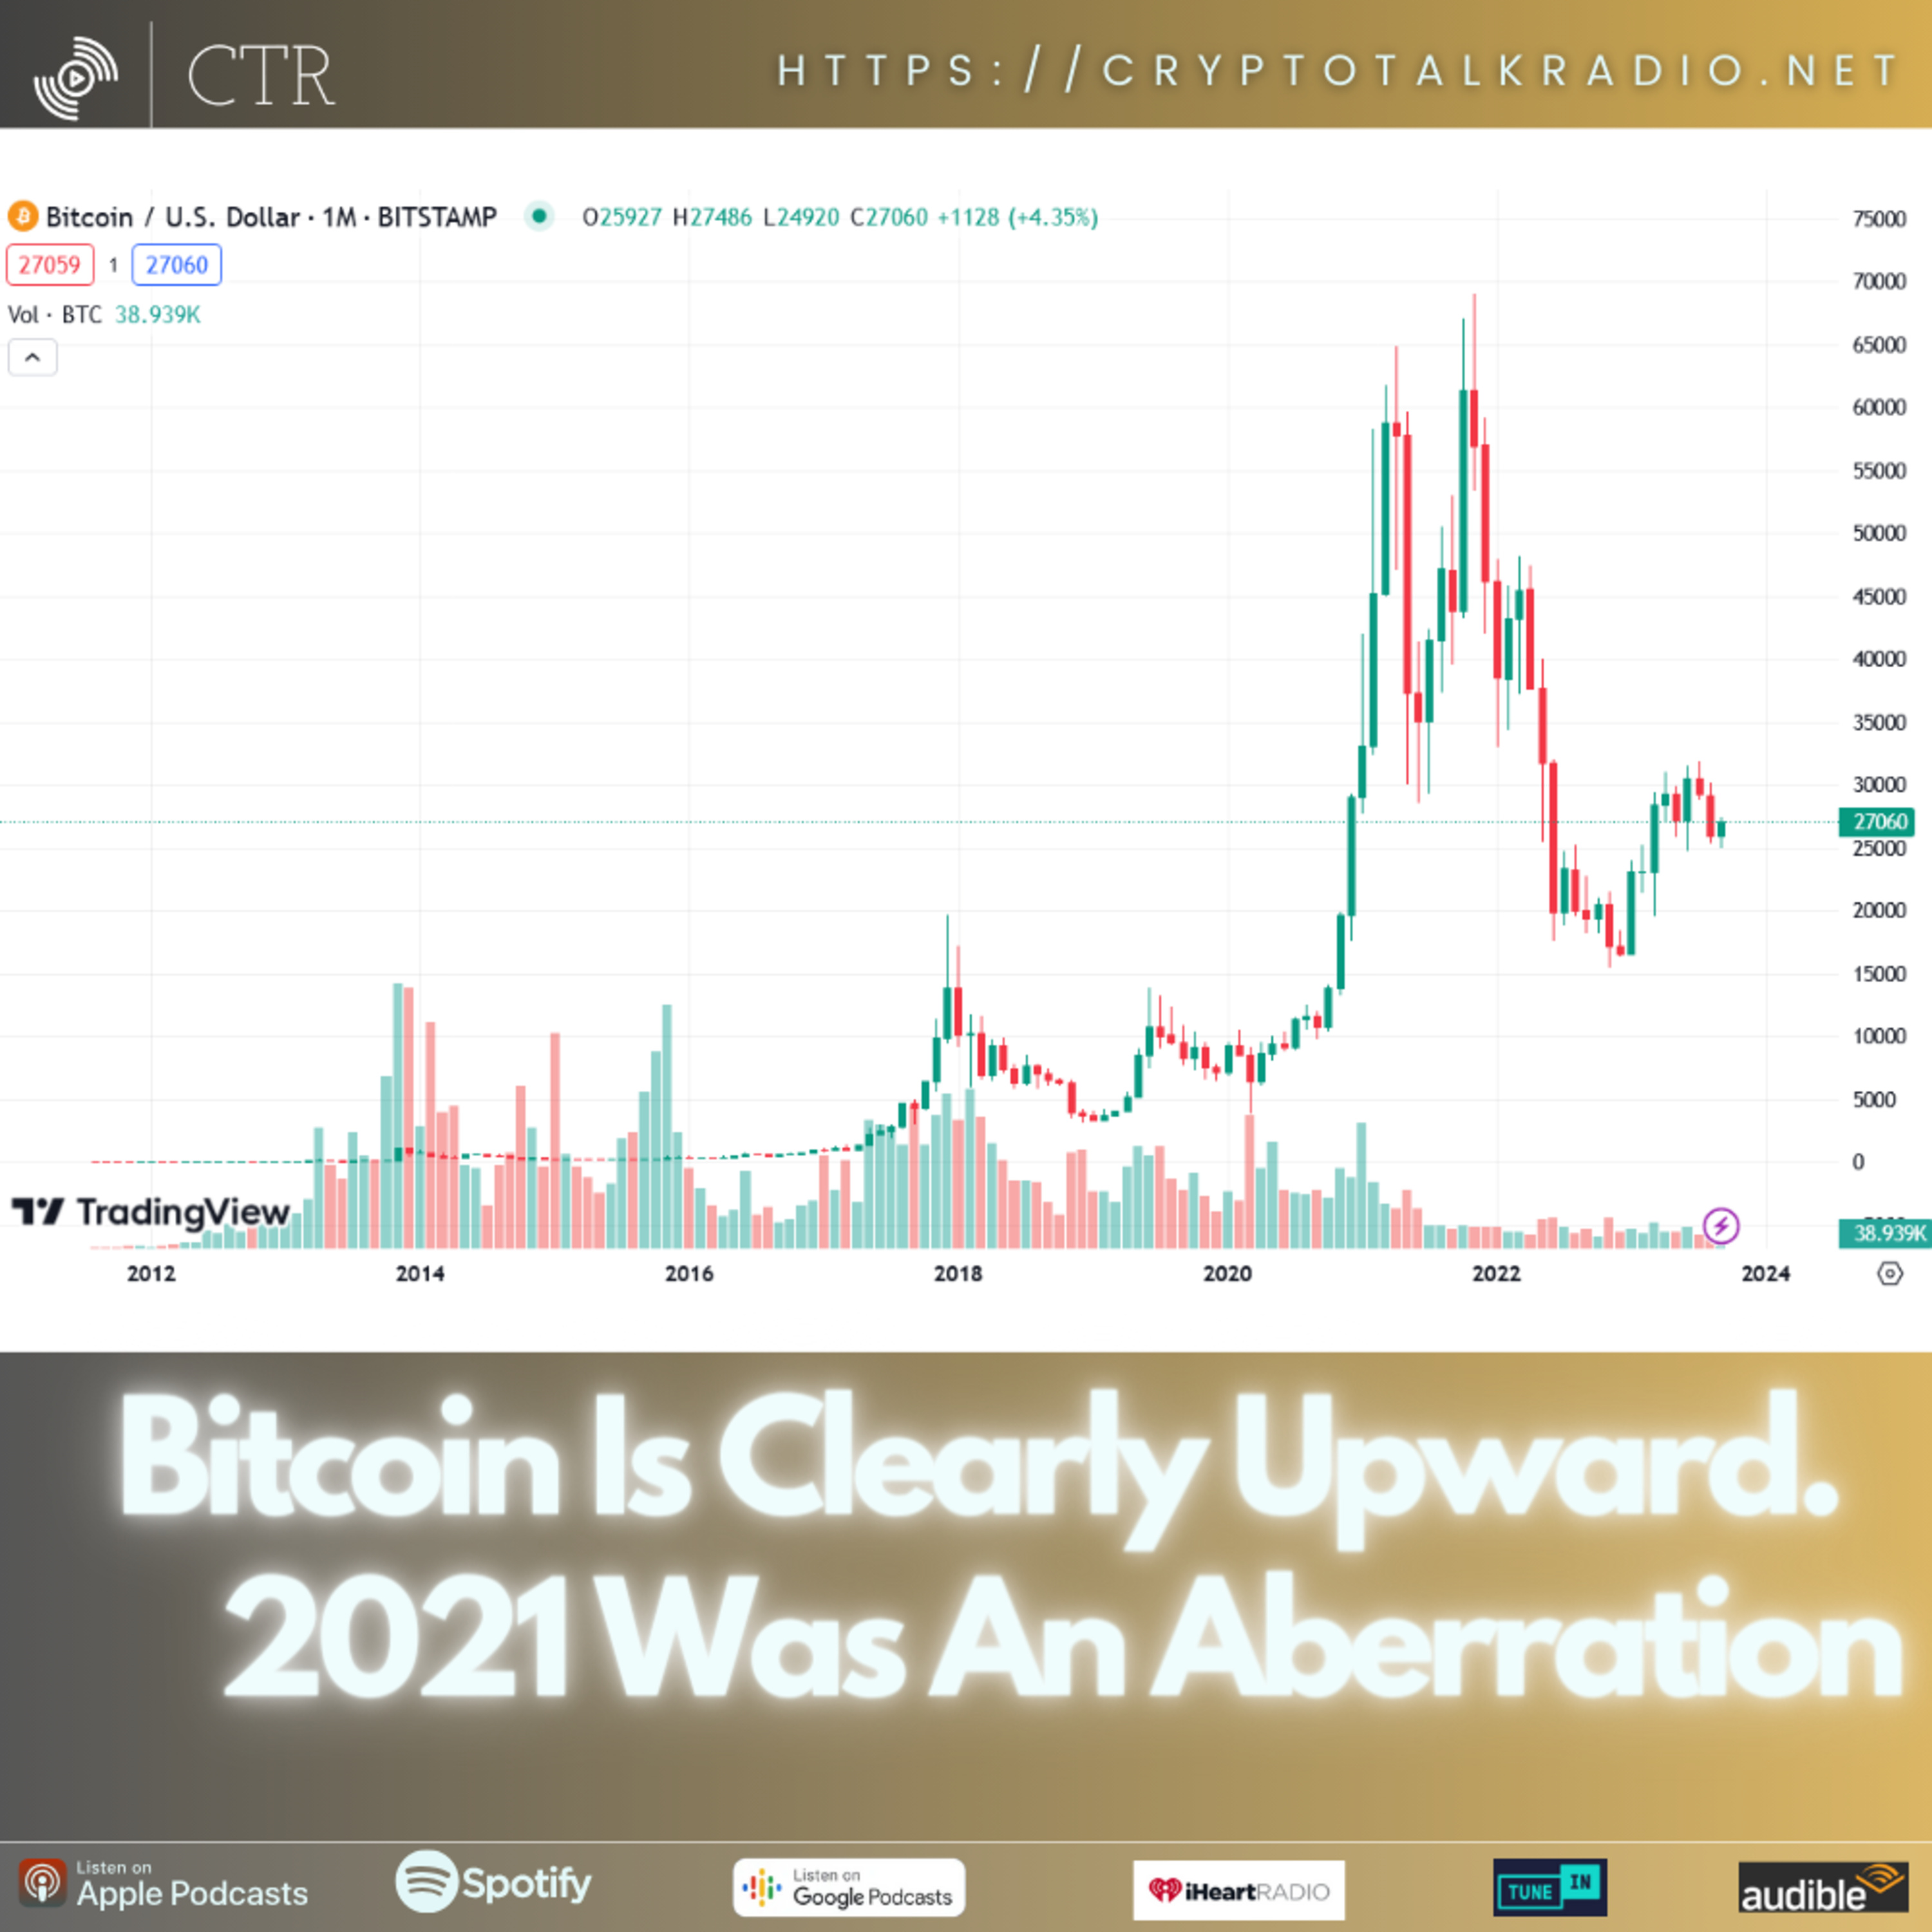 #Bitcoin Is Clearly Upward. 2021 Was An Aberration